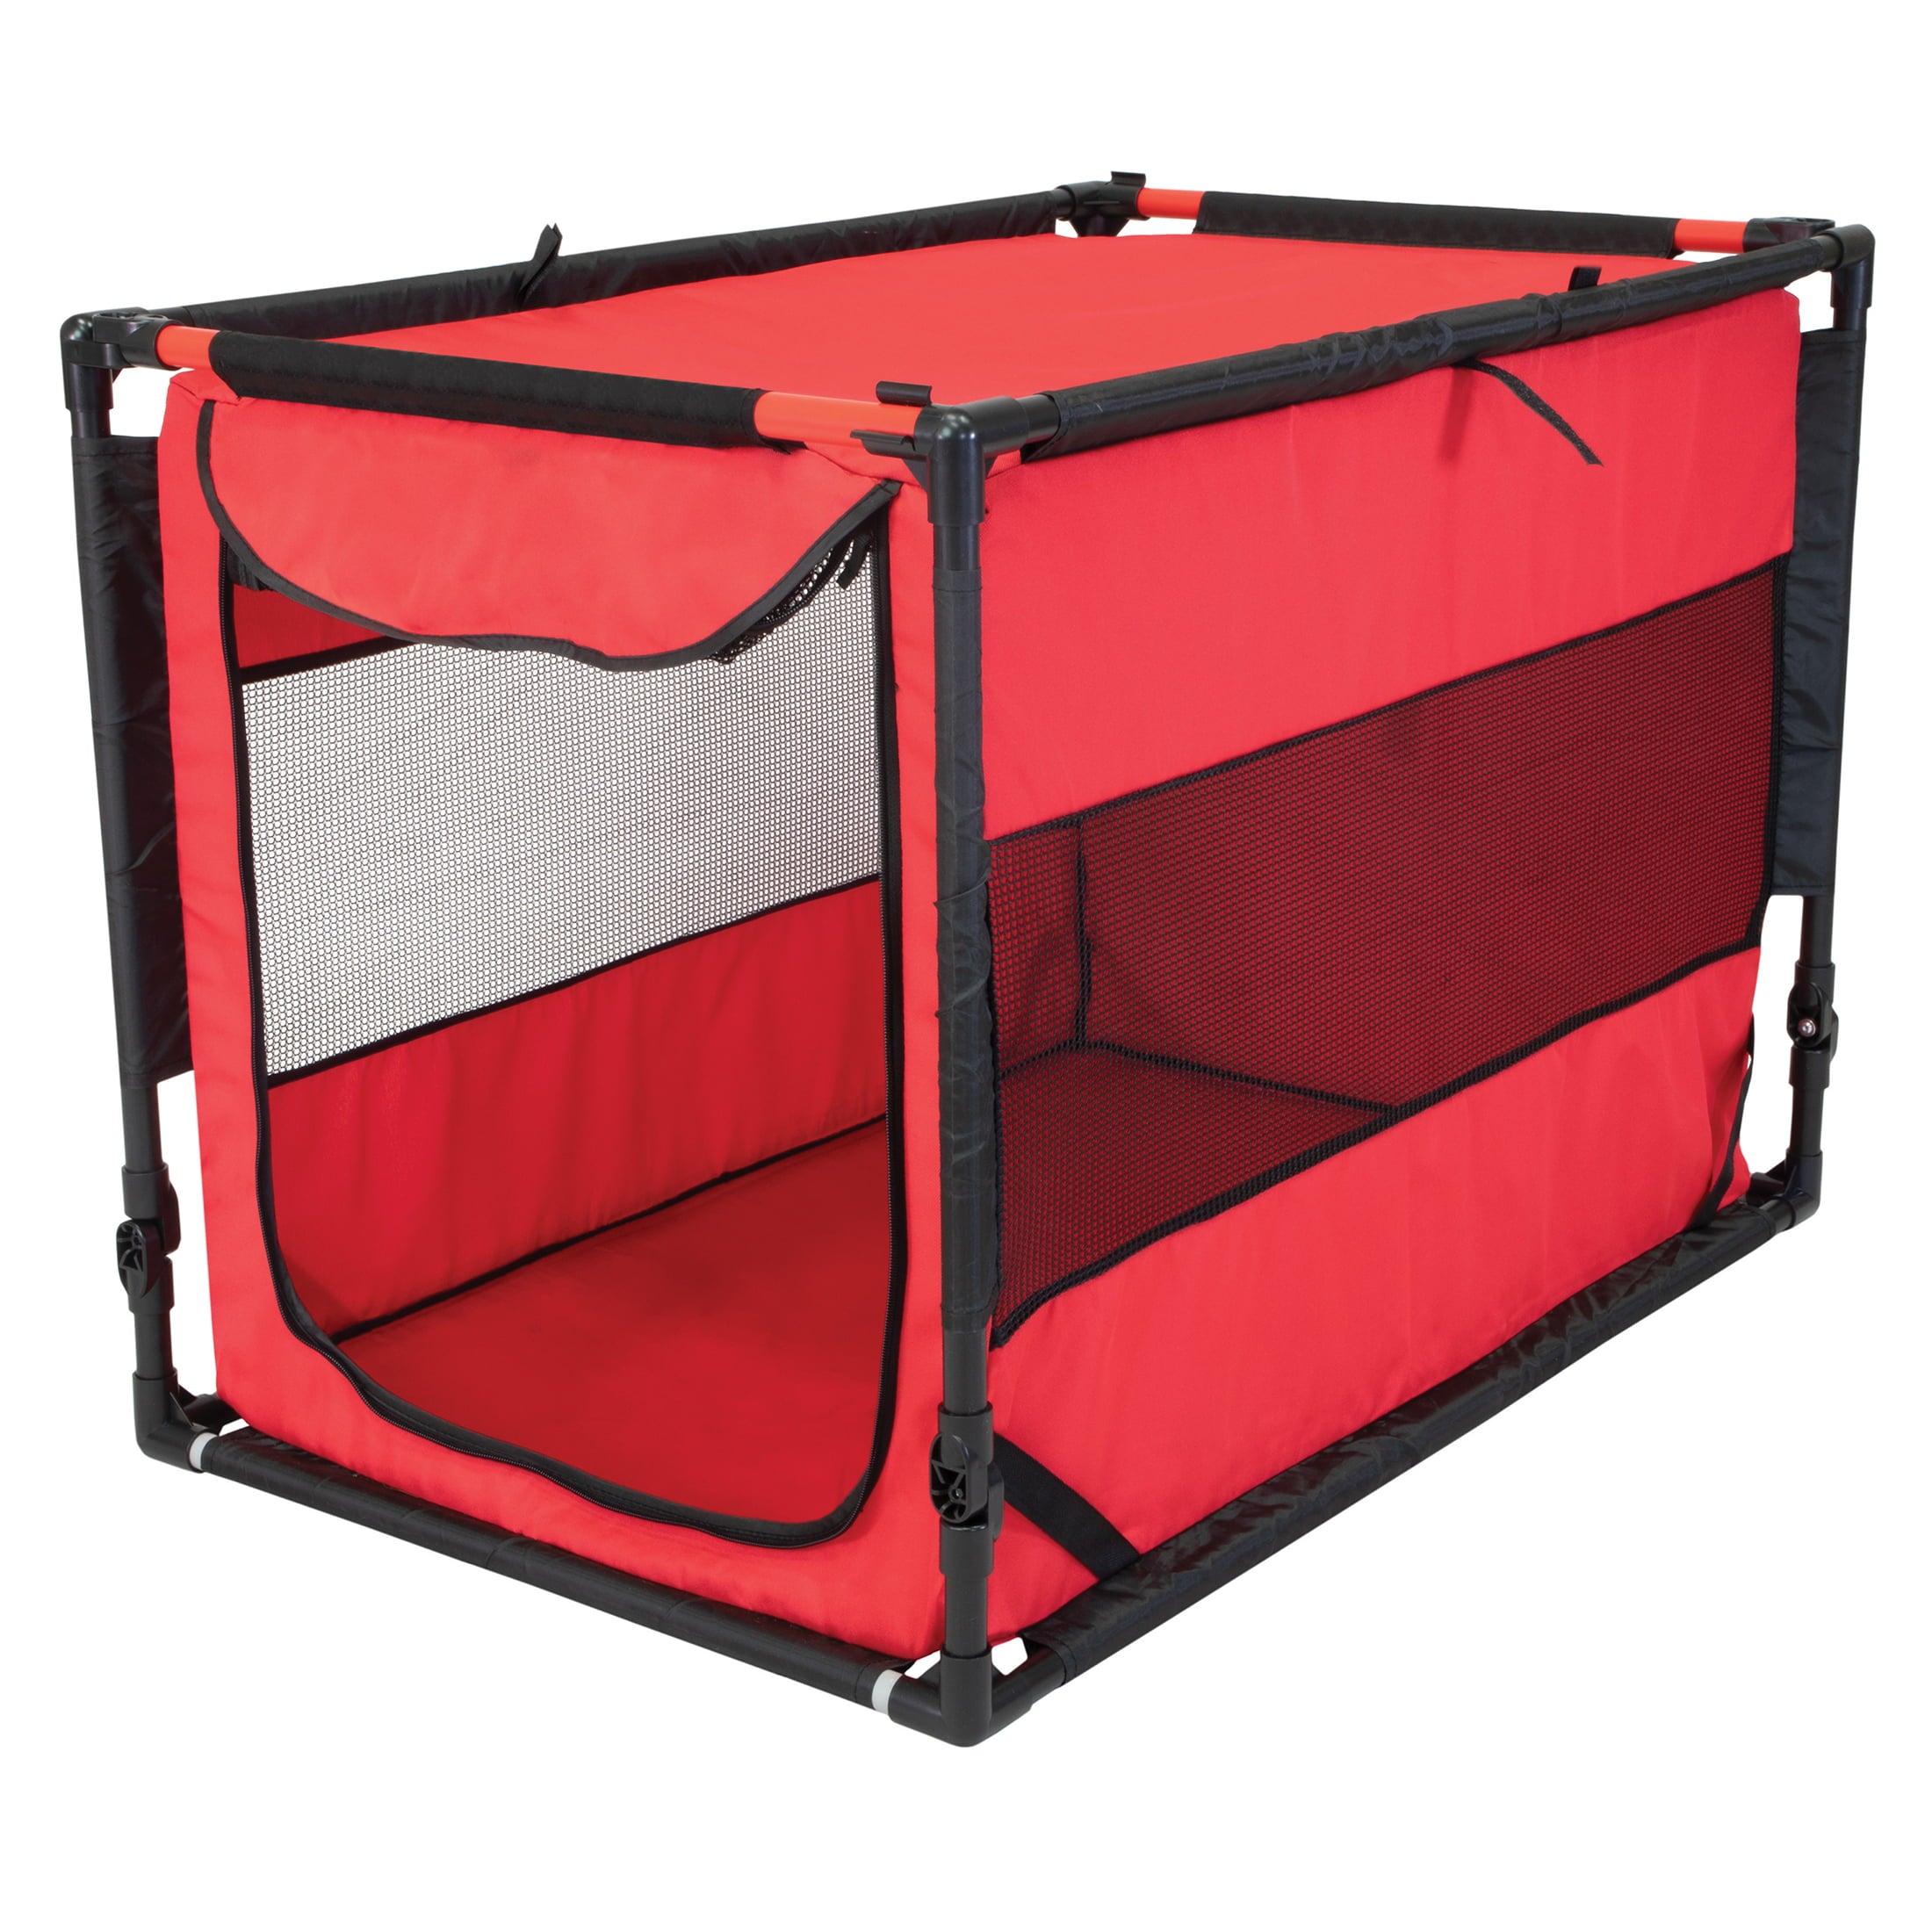 Vibrant Life Large Portable Dog Kennel， Red